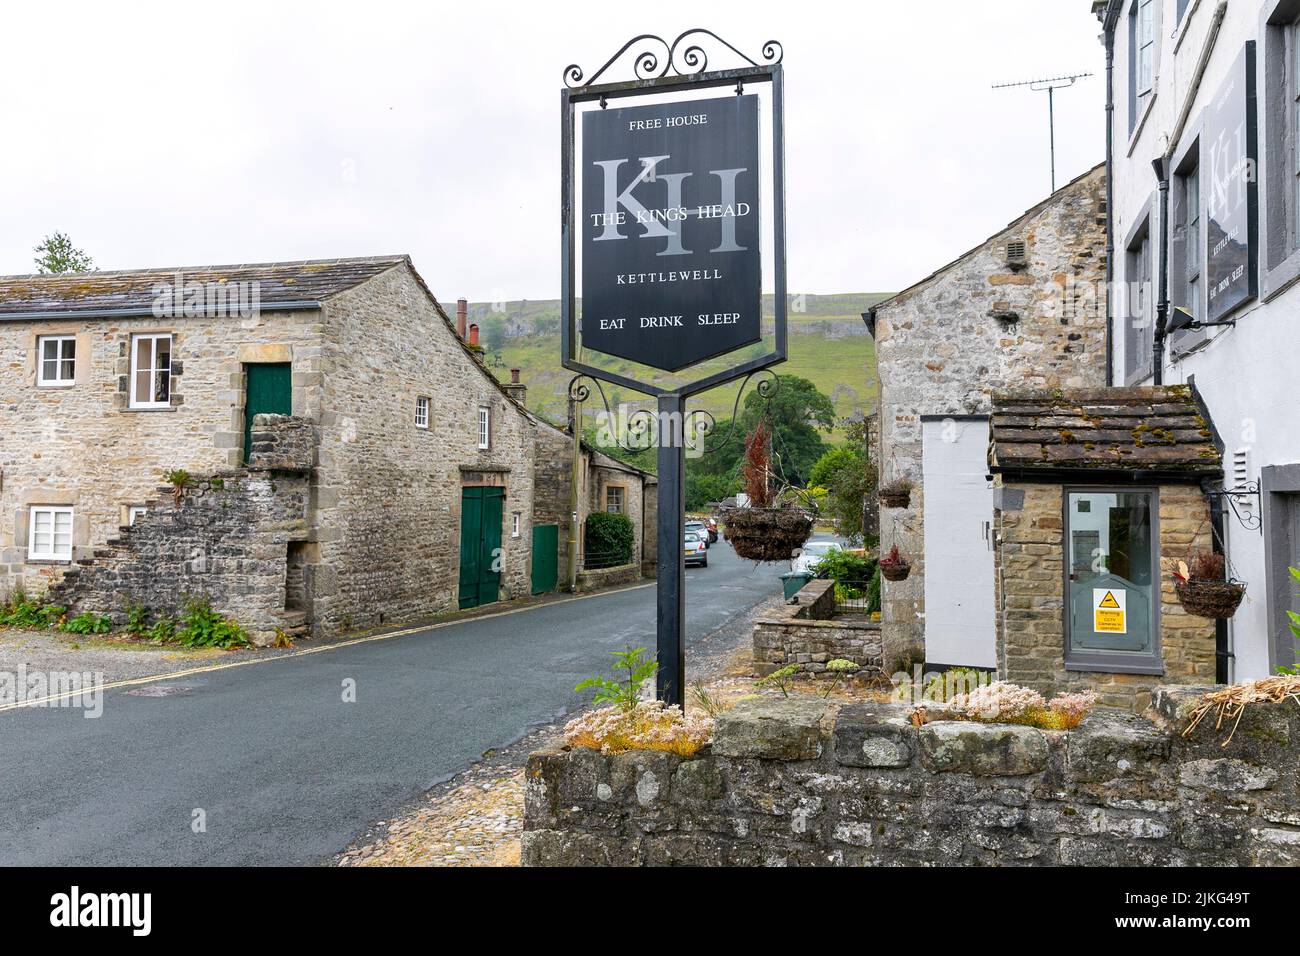 The Kings head public house gastropub in Kettlewell, village in the Yorkshire Dales,North Yorkshire,England,Uk Stock Photo